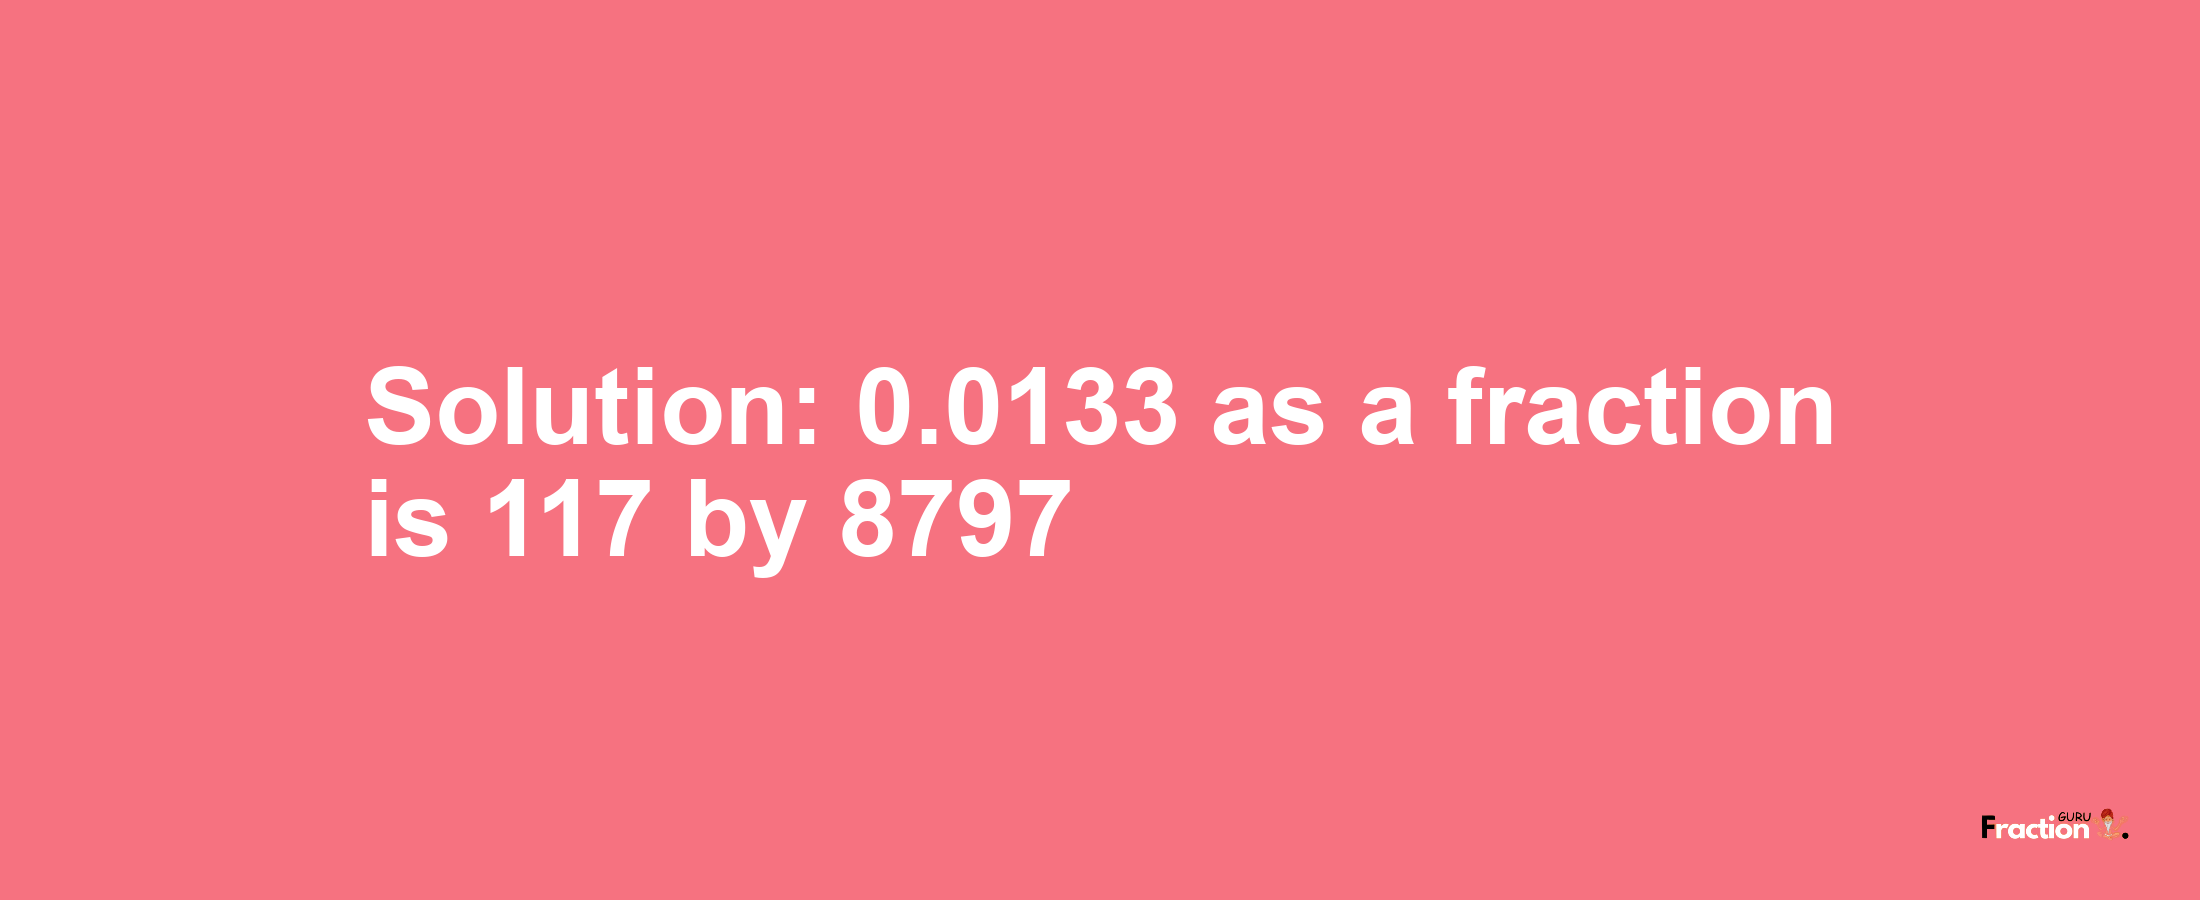 Solution:0.0133 as a fraction is 117/8797